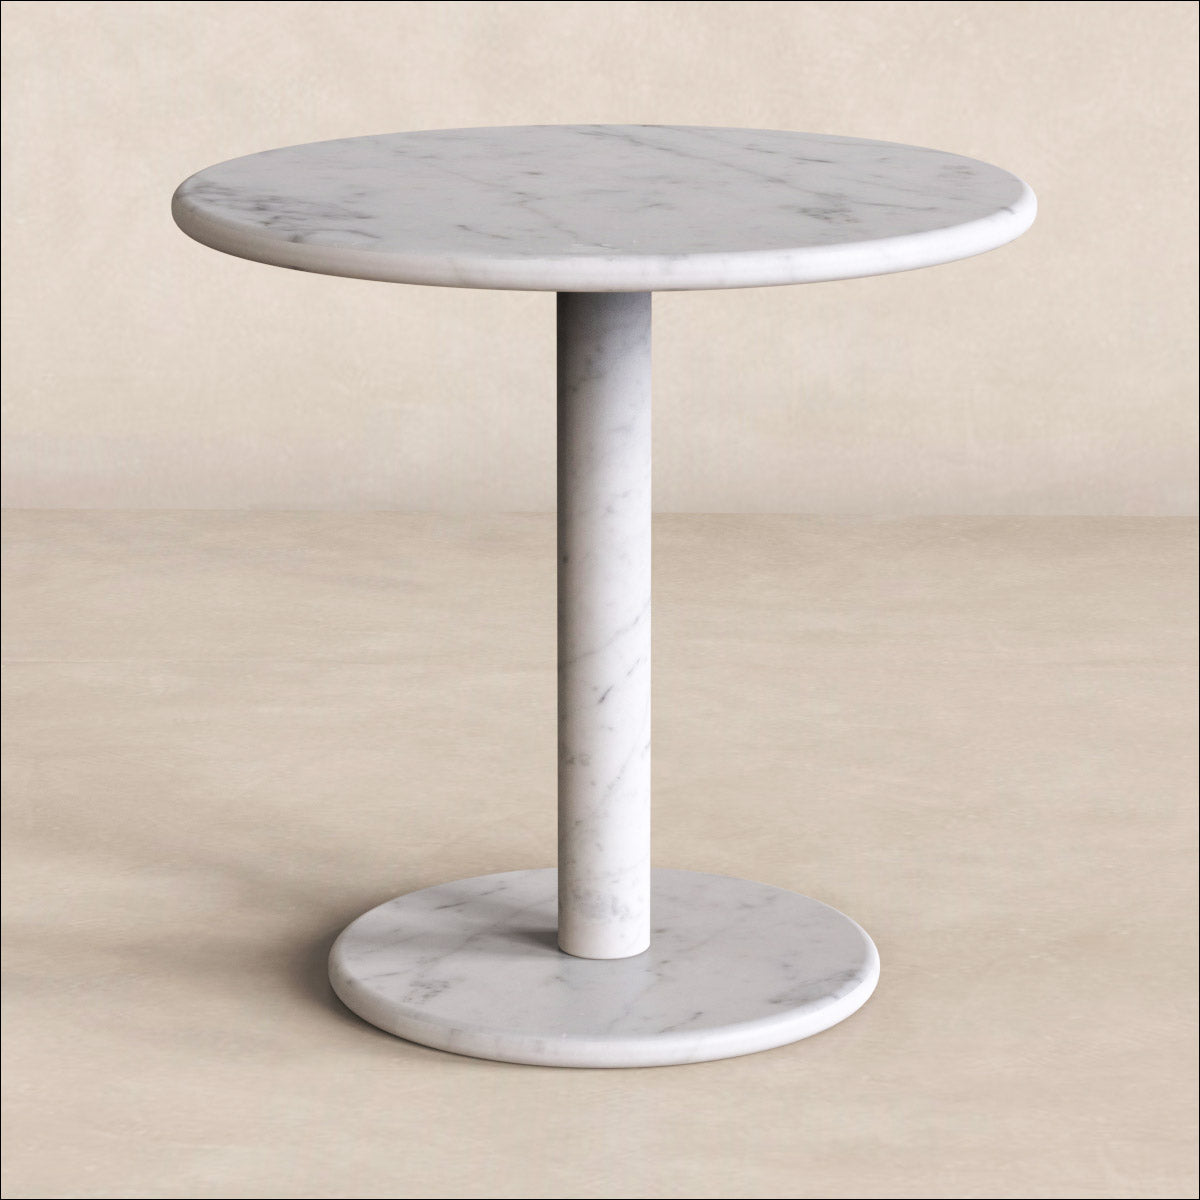 OIXDESIGN RoundHaven Short Side Table, Italian Carrara Marble, Micro Scene Graph, Front View